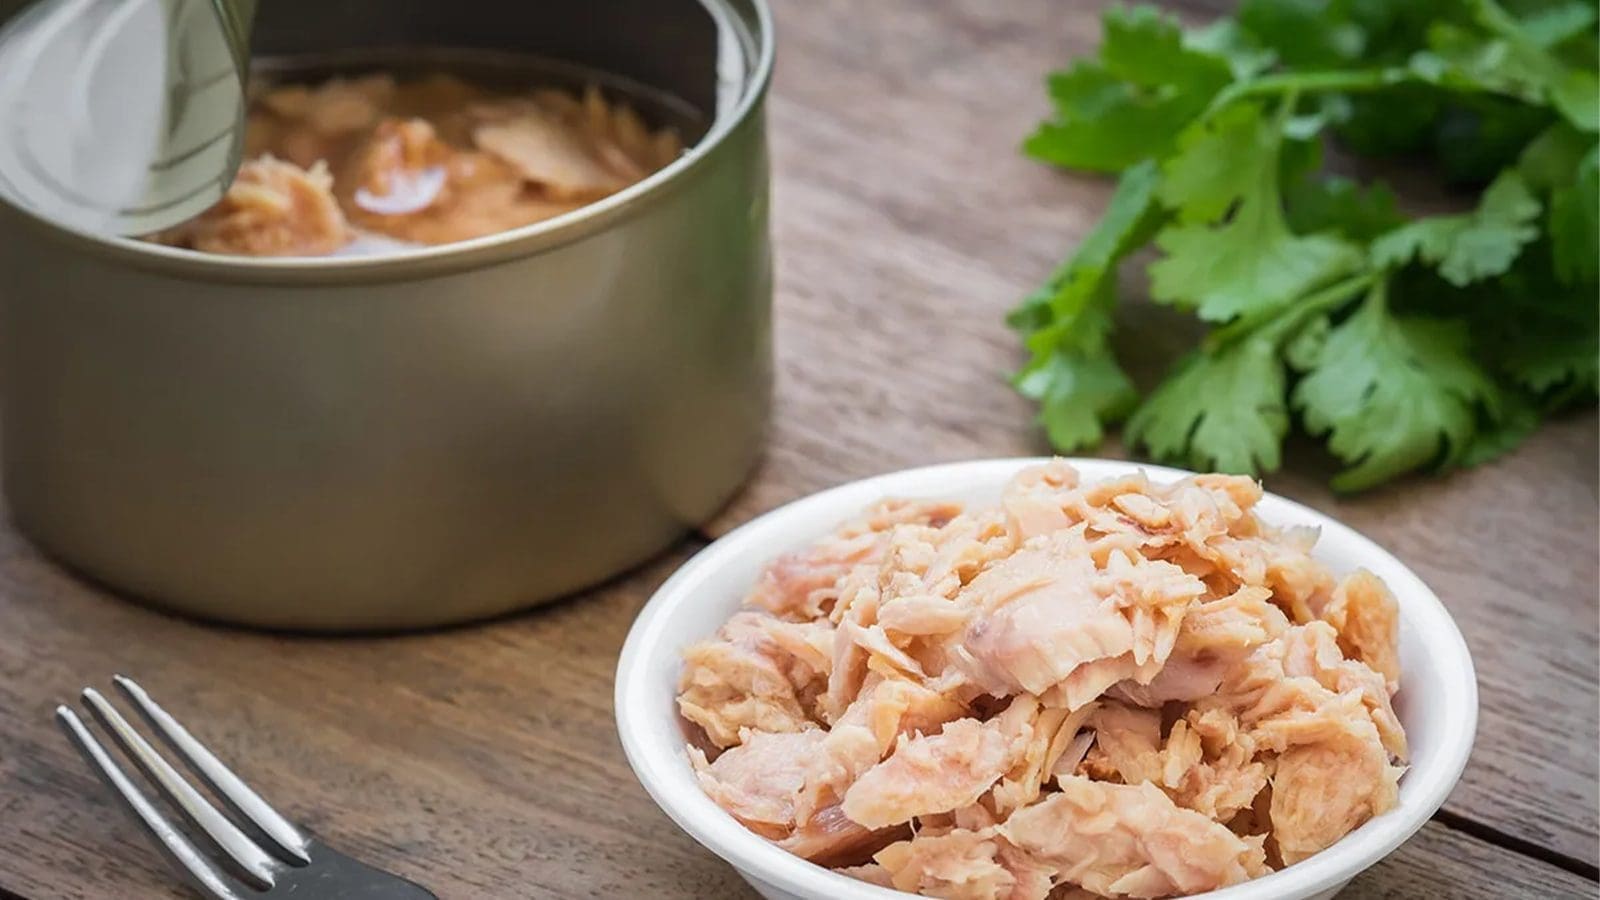 FDA proposes modernizing standards for canned tuna to meet consumer demand